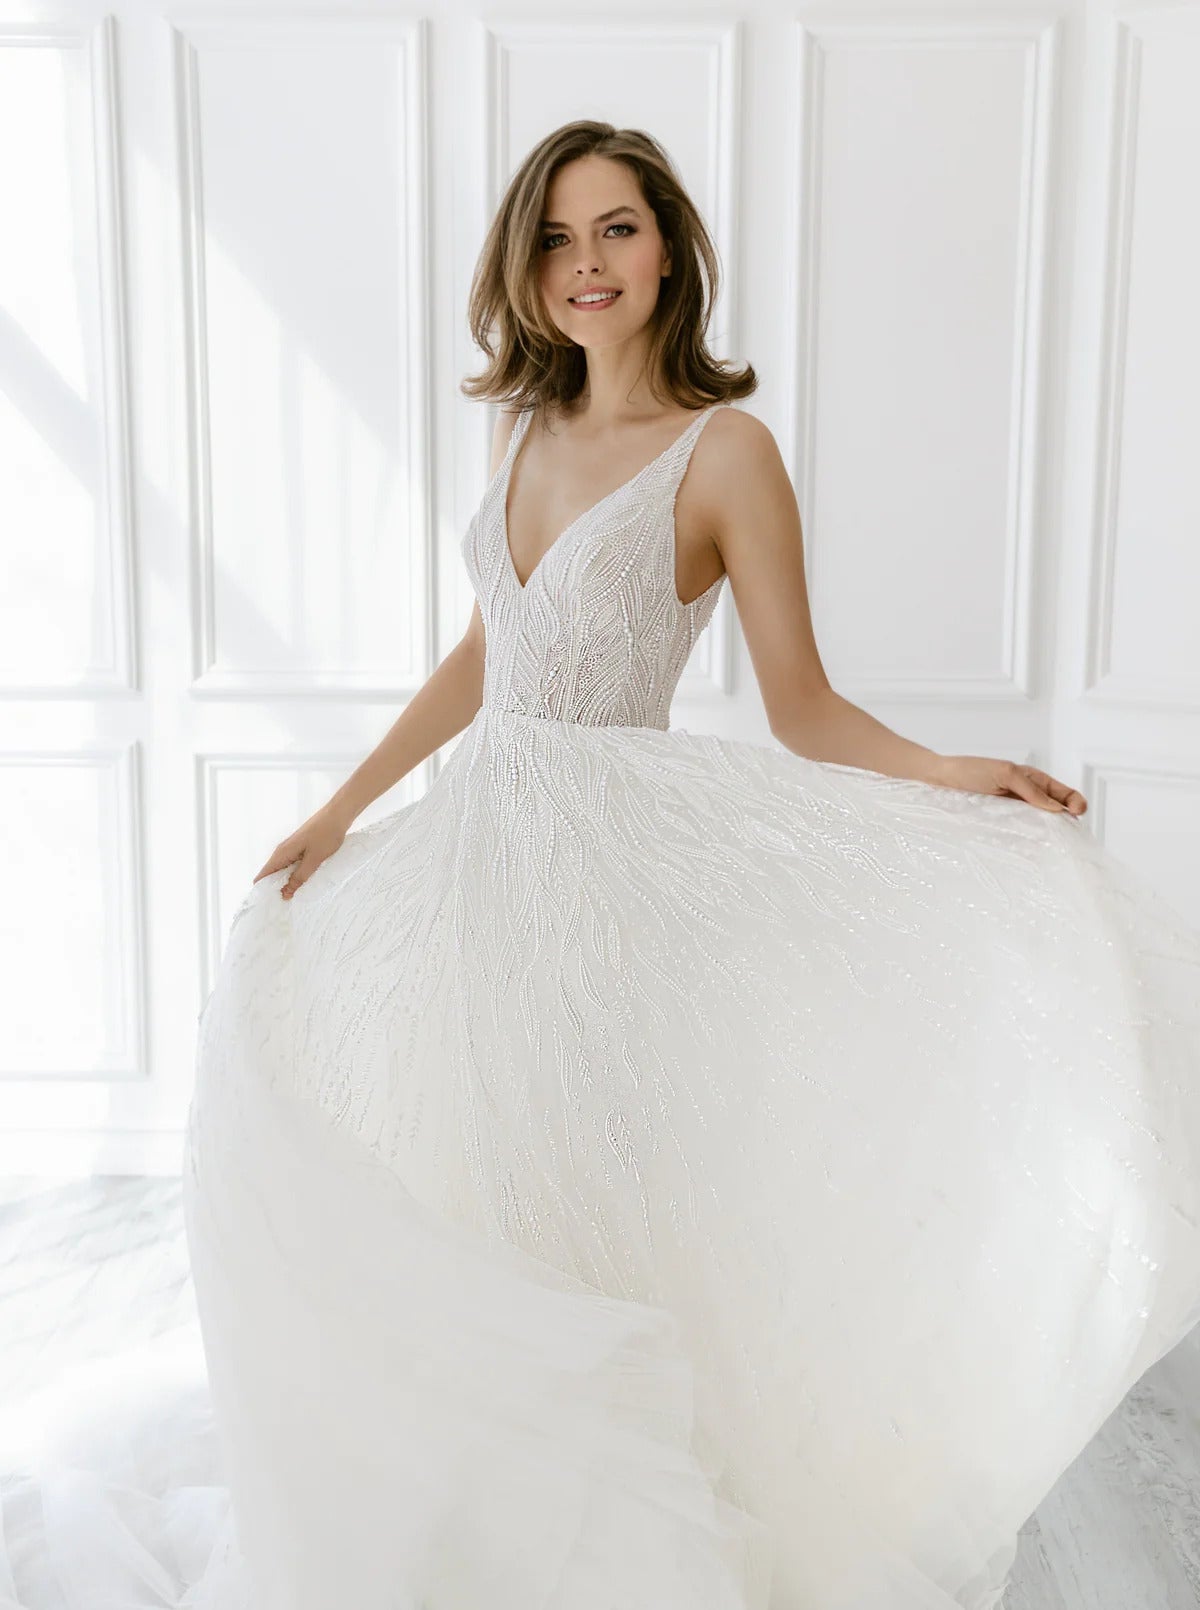 Pearl Embellished A-Line Gown by Enaura Bridal - Image 1